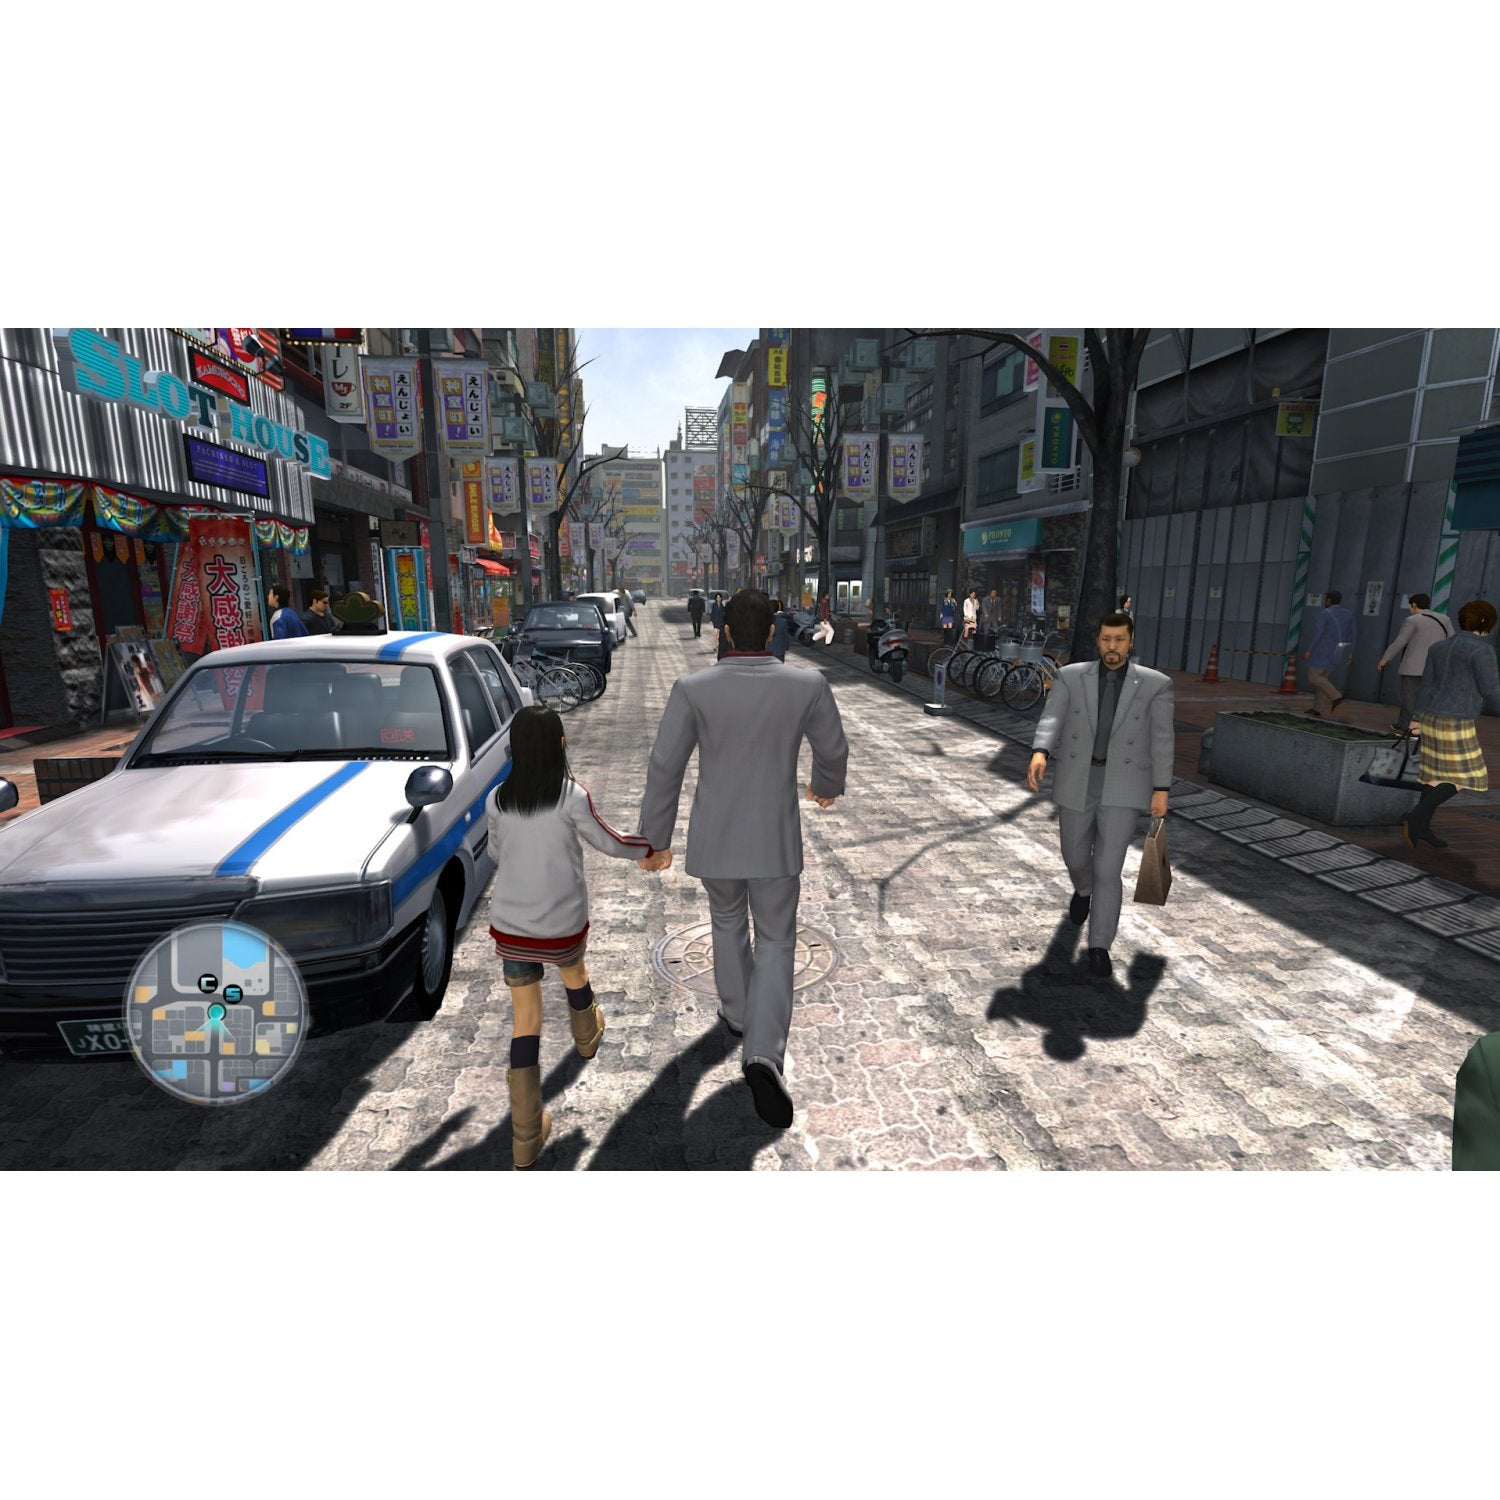 PS4 The Yakuza Remastered Collection (M18)